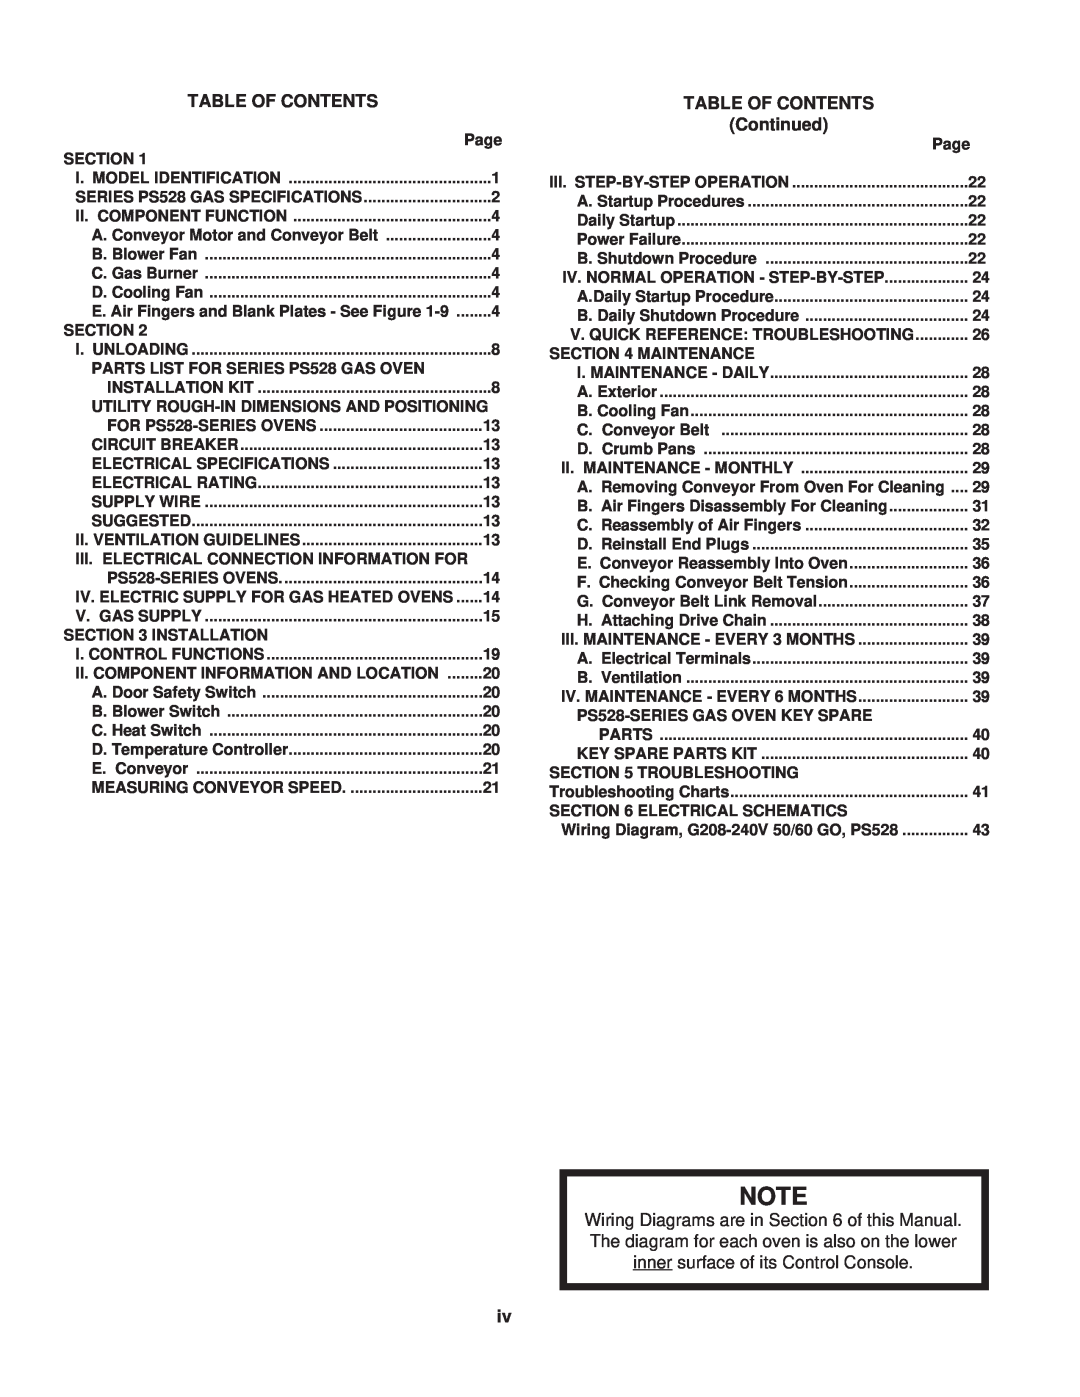 Middleby Marshall PS528G installation manual Table Of Contents, Continued, A. Conveyor Motor and Conveyor Belt 